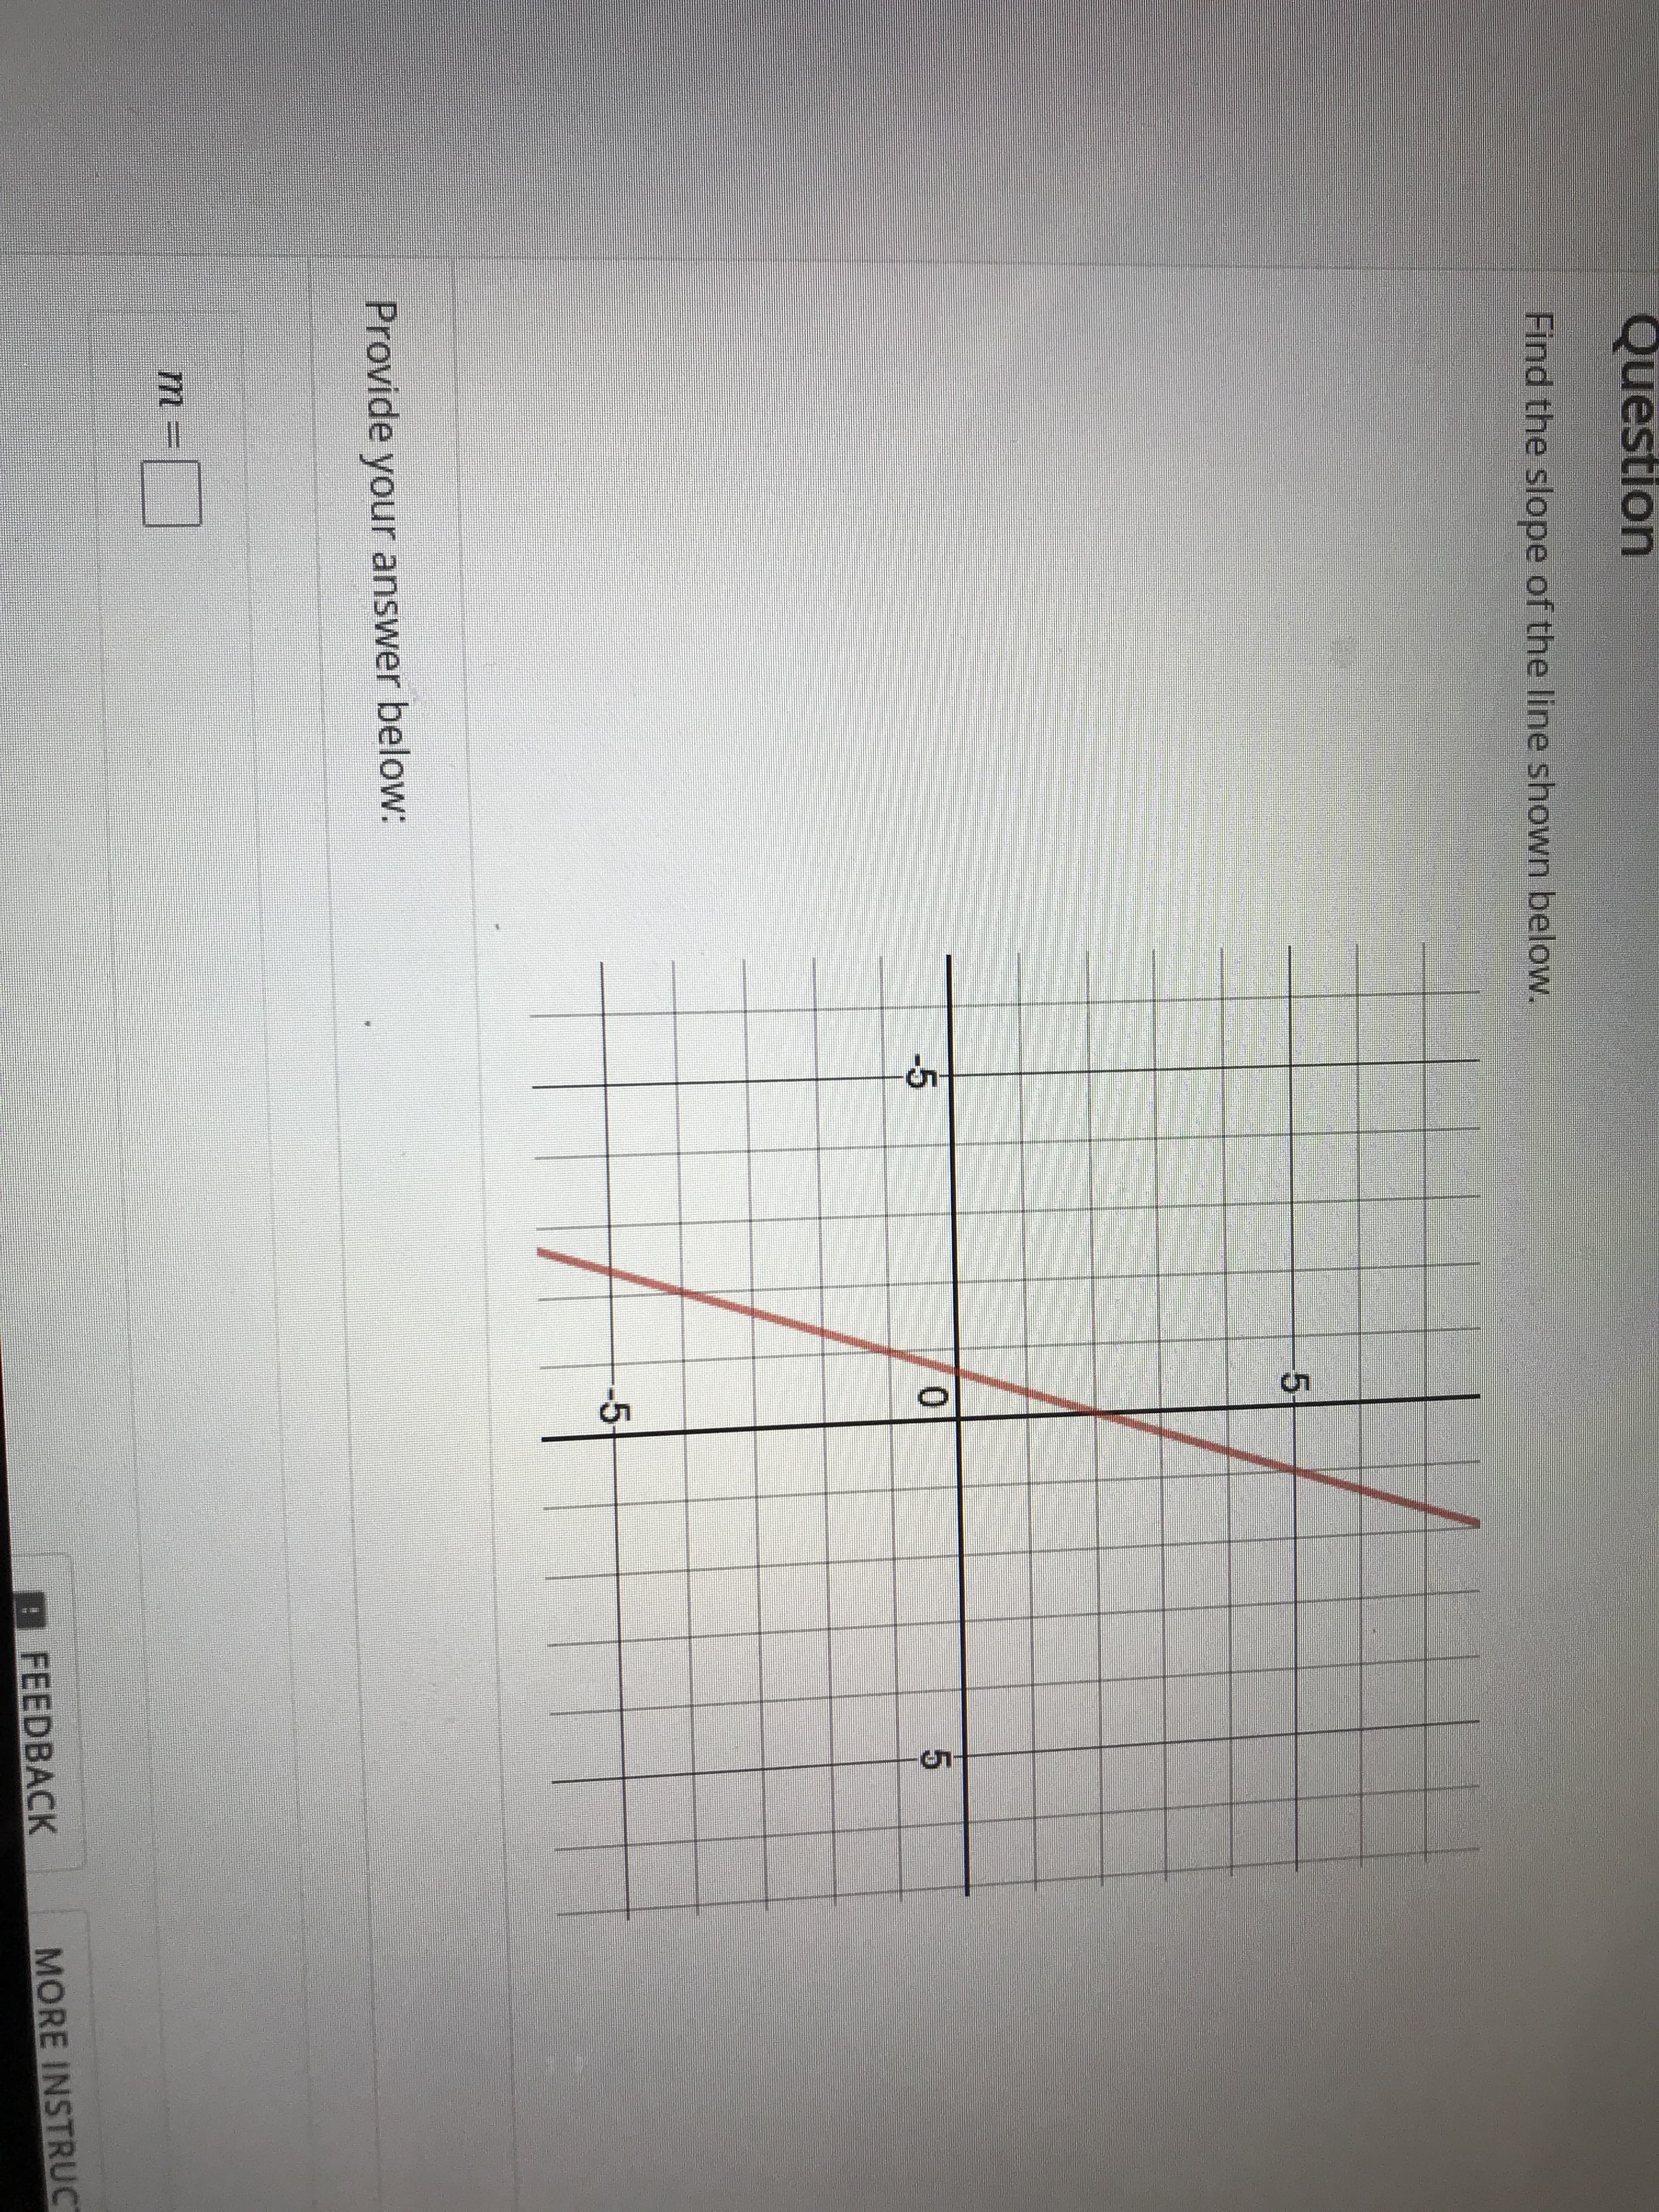 Question
Find the slope of the line shown below.
-5
0
-5
Provide your answer below:
m
BFEEDBACK
MORE INSTRUC
